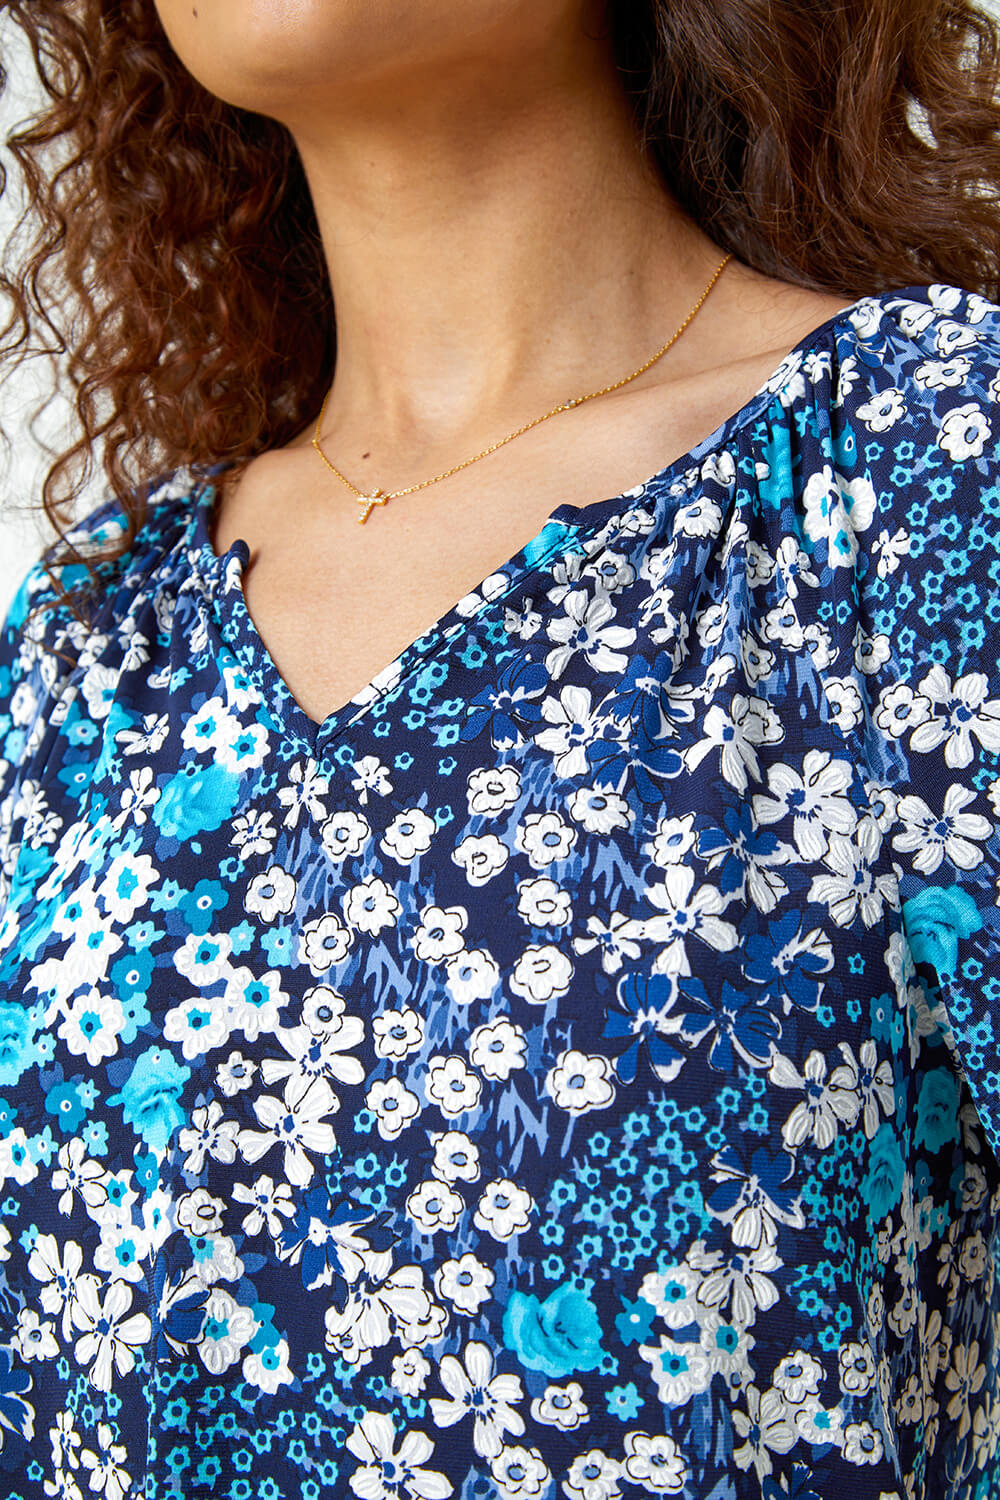 Blue Textured Floral Print Stretch T-Shirt, Image 5 of 5